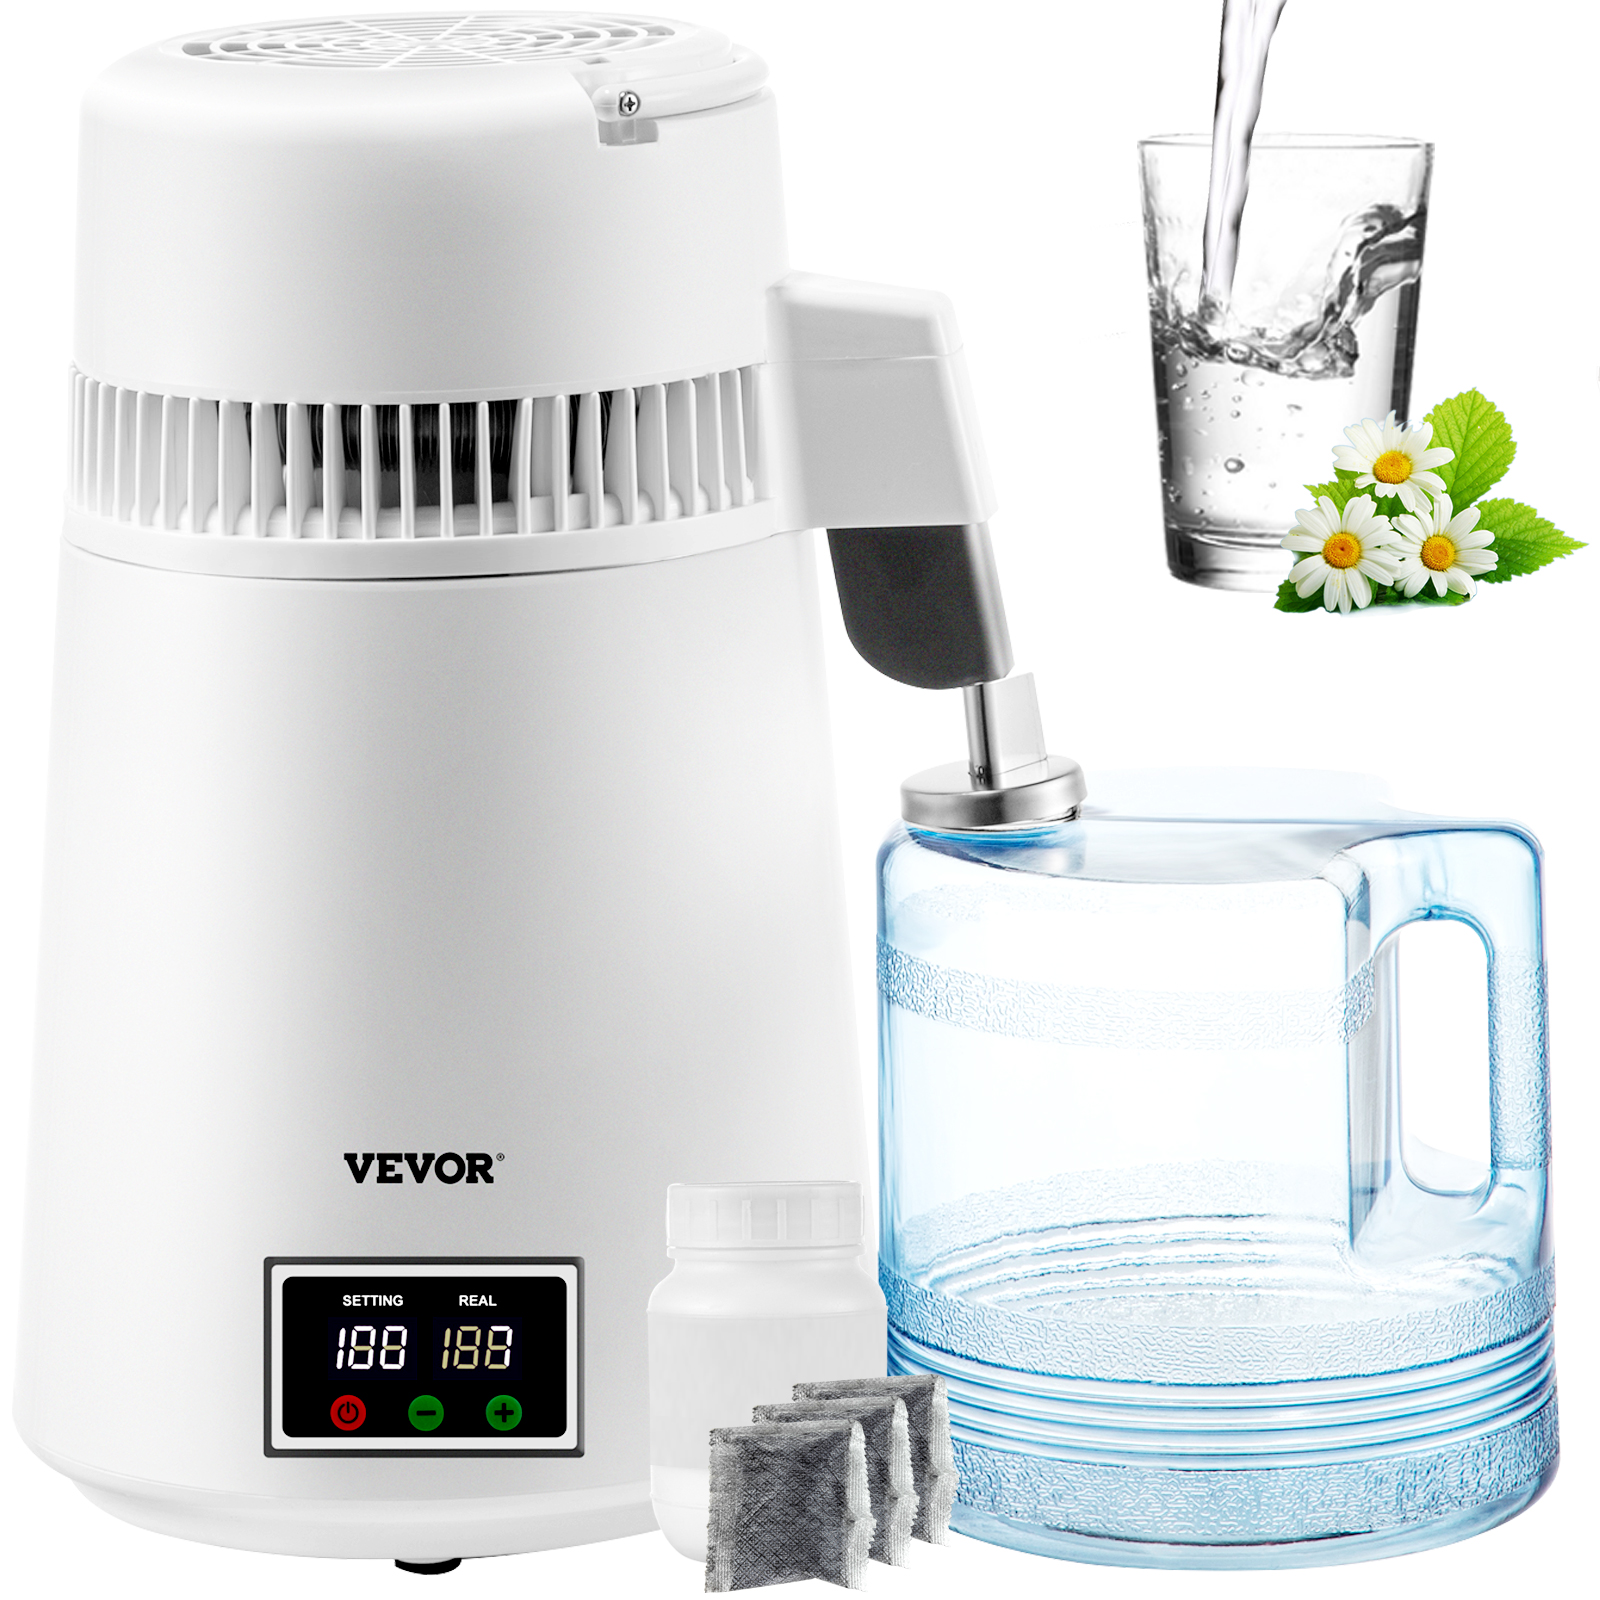 VEVORbrand Pure Water Distiller 750W, Purifier Filter Fully Upgraded with  Handle 1.1 Gal /4L, BPA Free Container, Perfect for Home Use, White